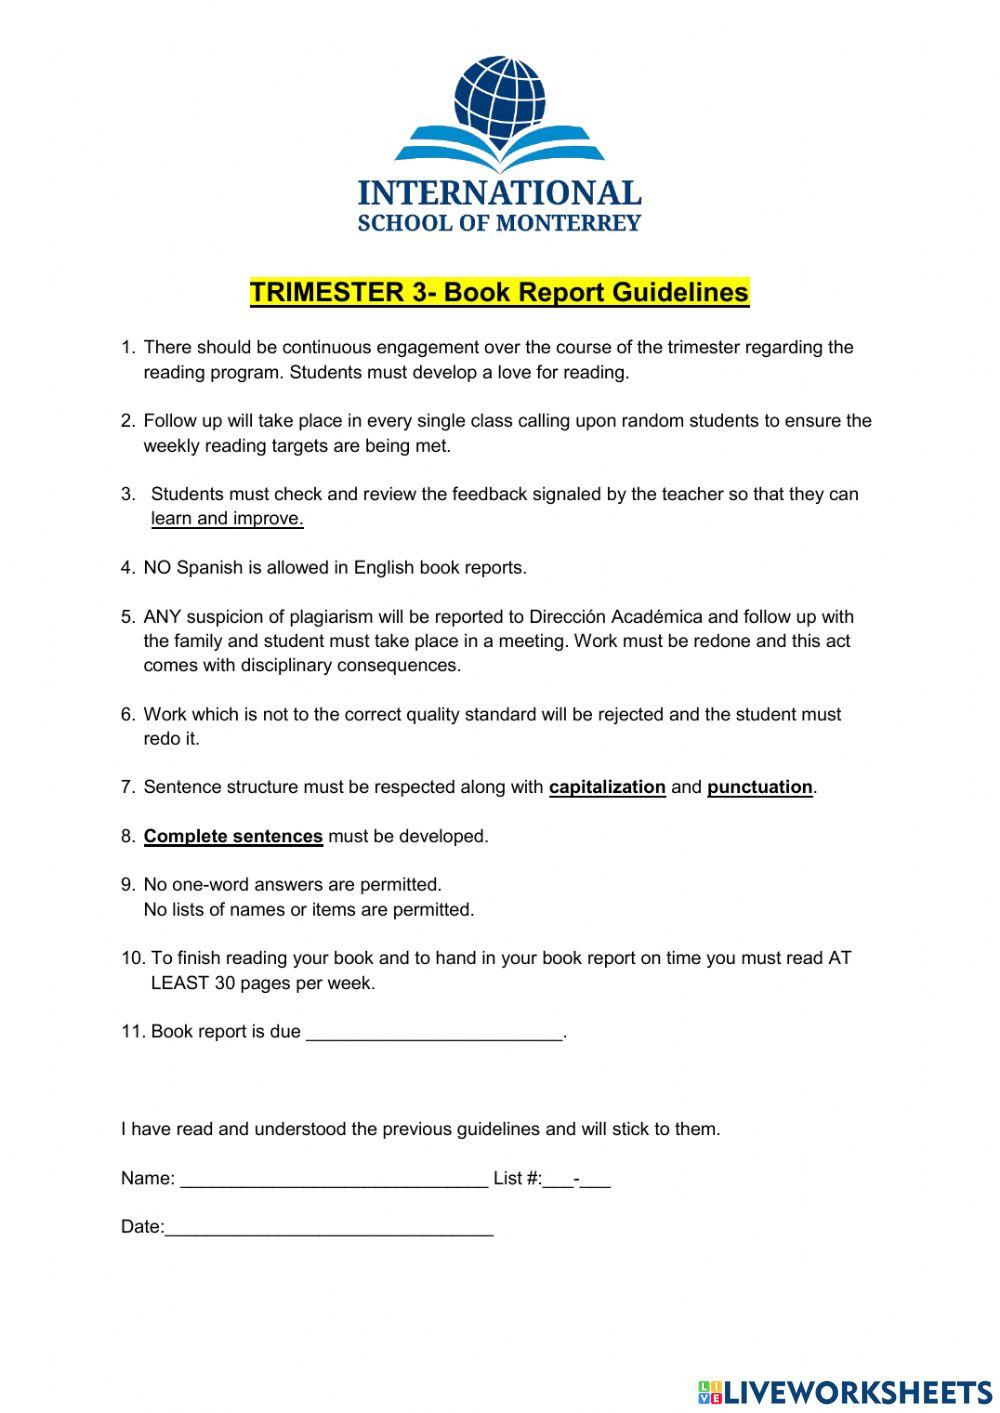 Book Report part 0 of 11 GUIDELINES no due date